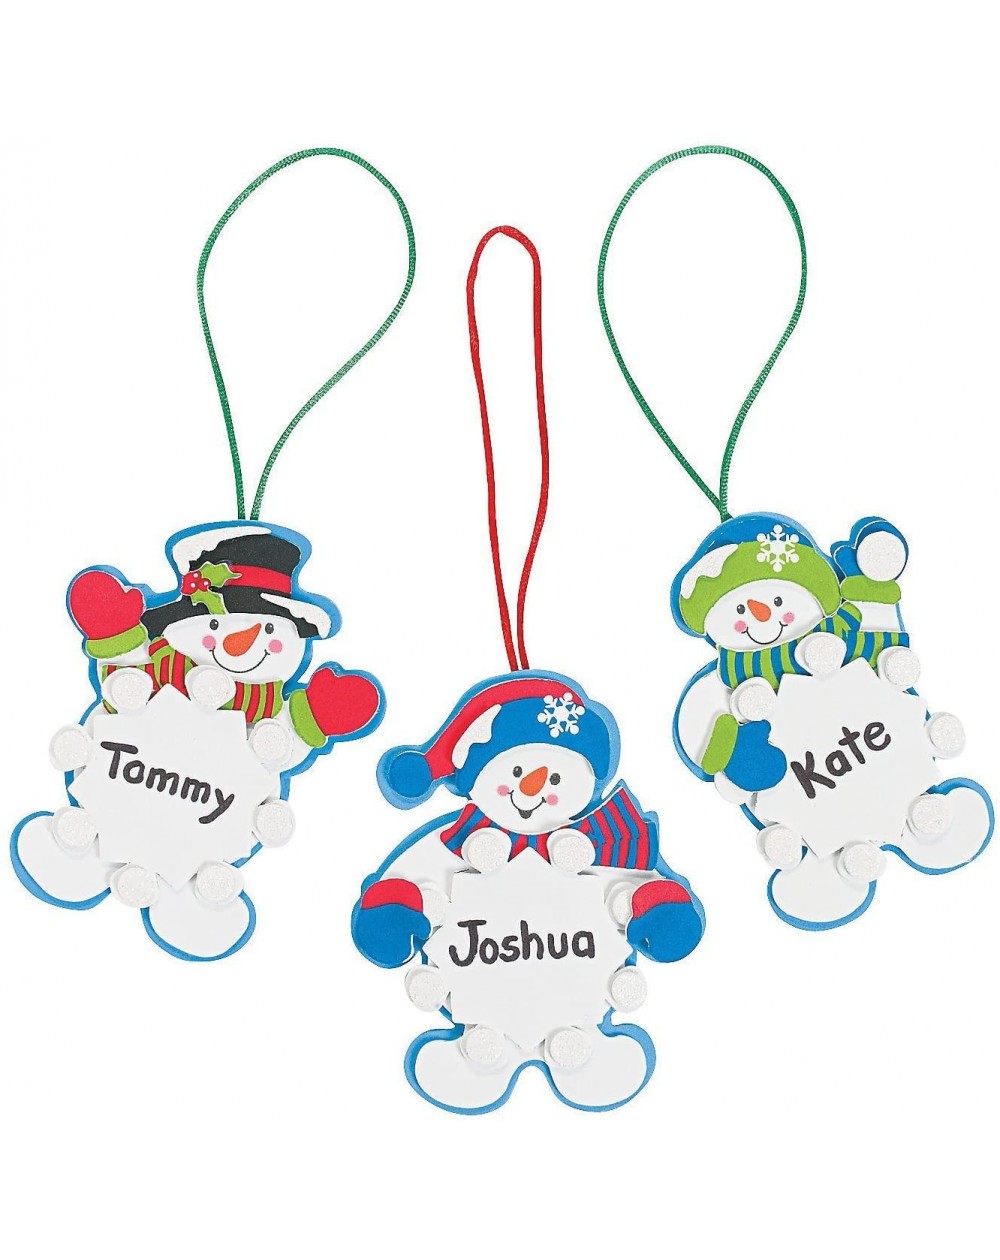 Ornaments Snowman Snowflake Ornament Craft Kit - Crafts for Kids and Fun Home Activities - CF1243DDY8B $10.91